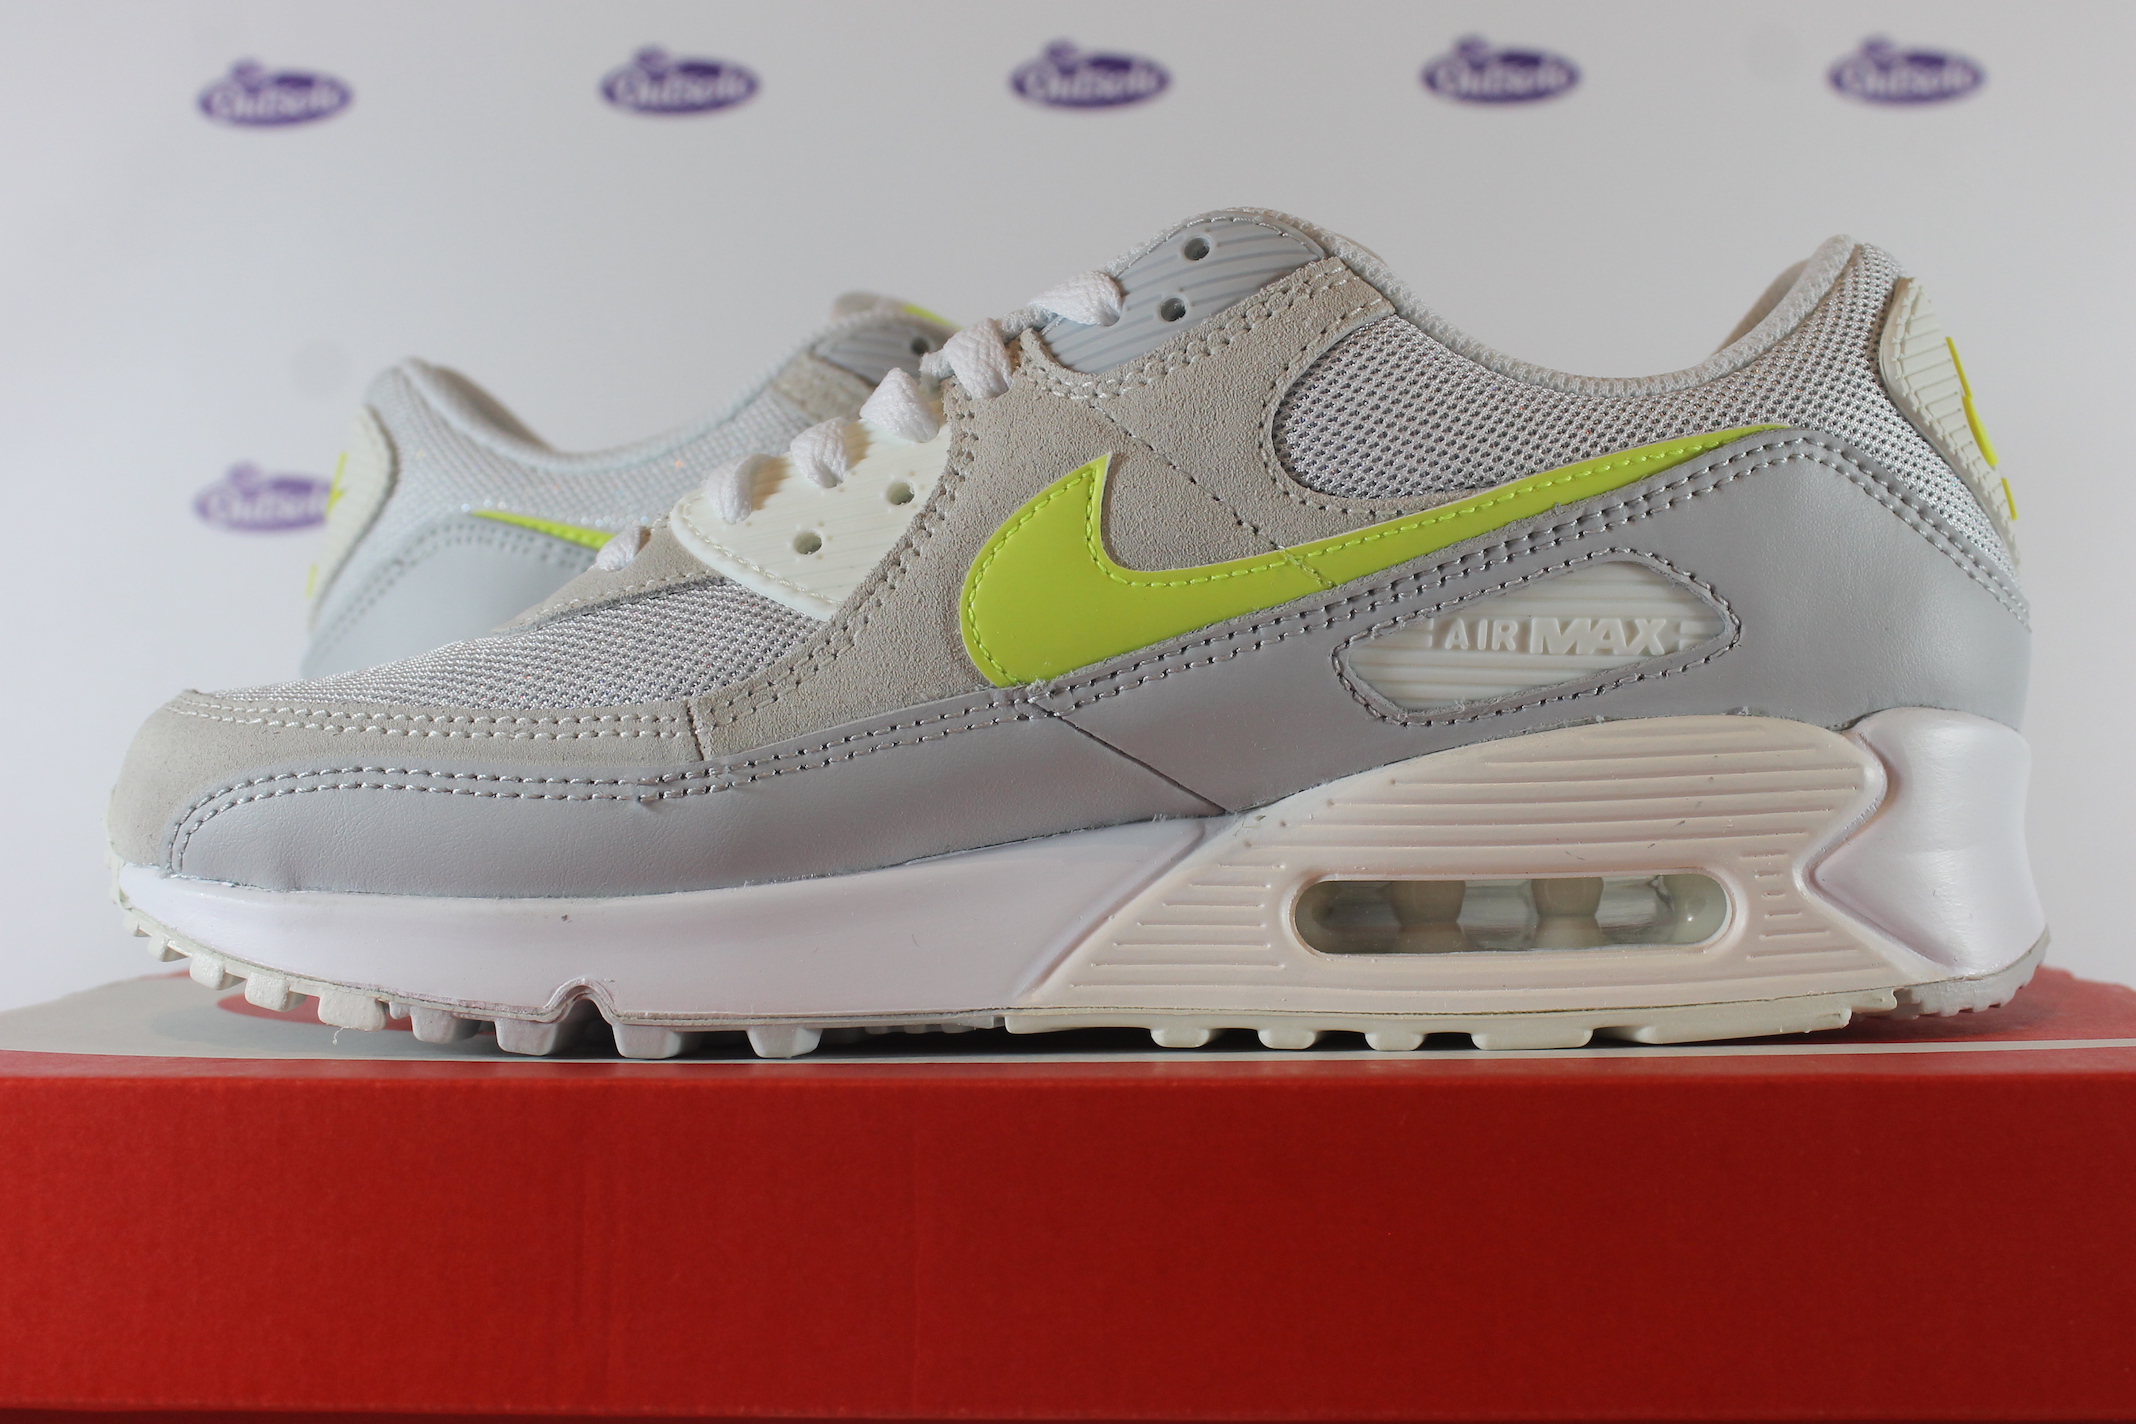 Nike Air Max 90 Lemon Venom • In stock at Outsole